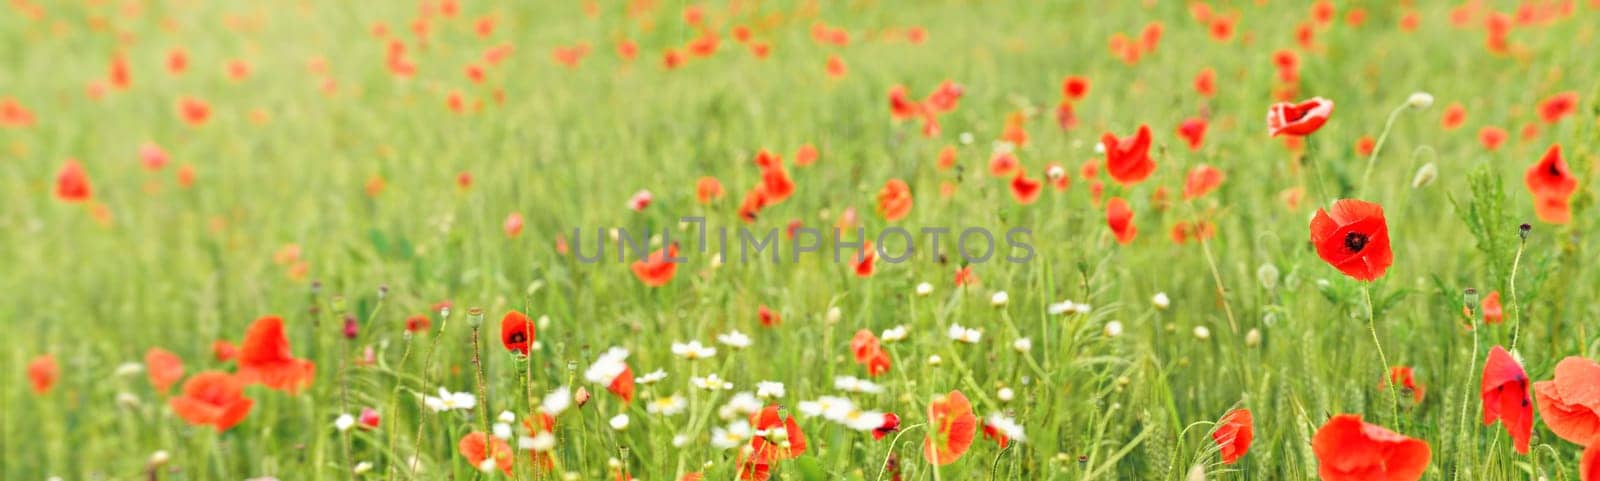 Wild red poppies growing in field of unripe green wheat - wide banner by Ivanko